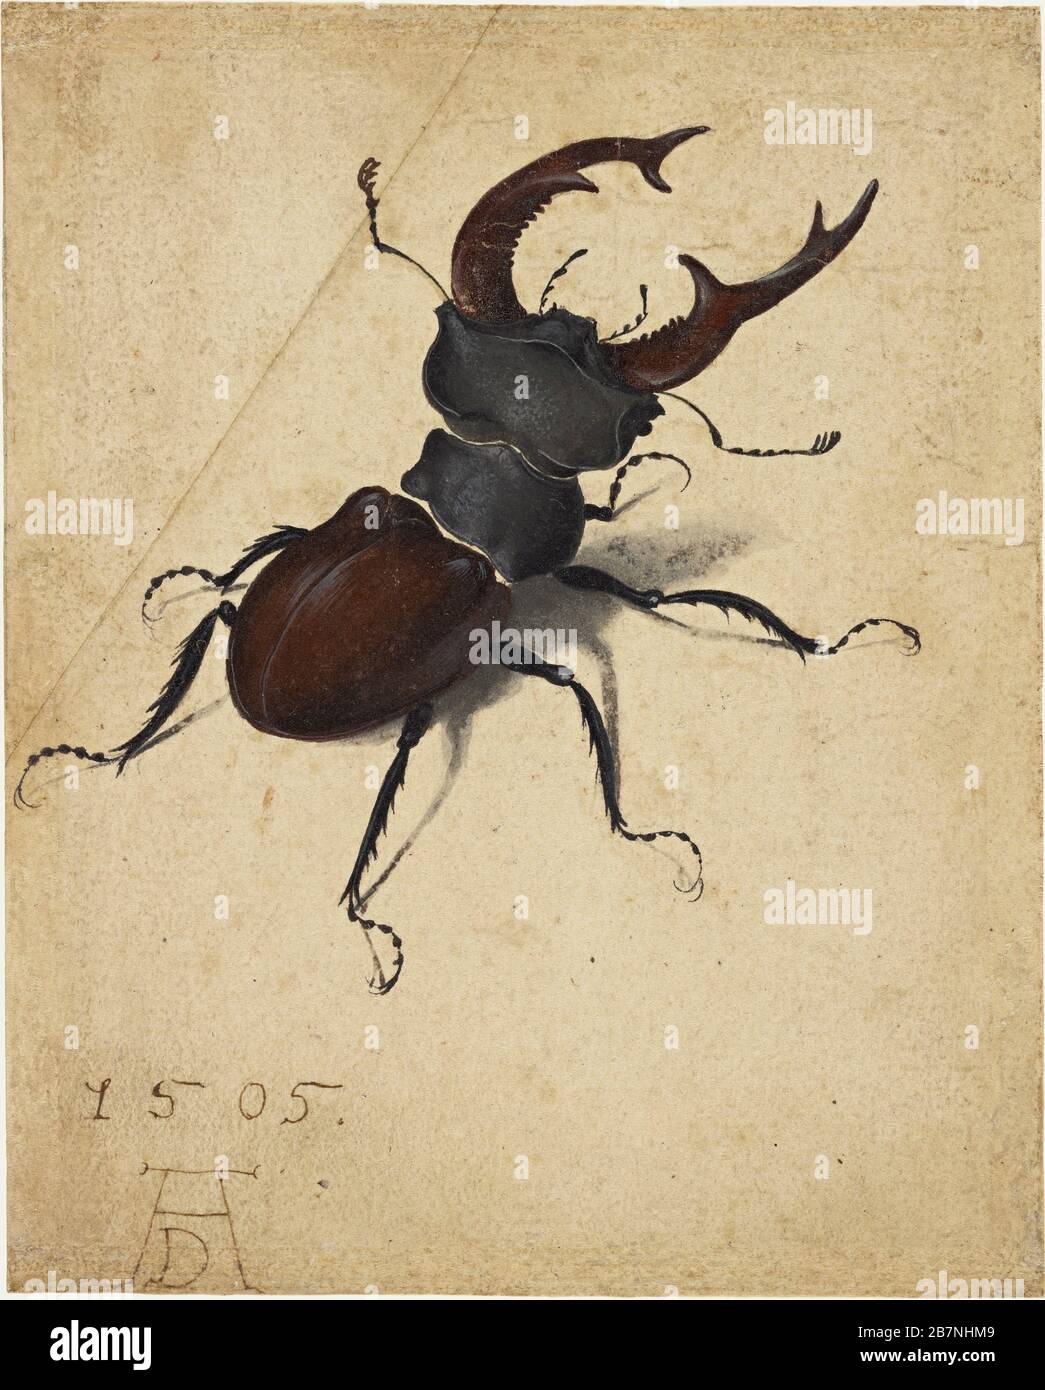 Stag Beetle, 1505. Found in the Collection of J. Paul Getty Museum, Los Angeles. Stock Photo